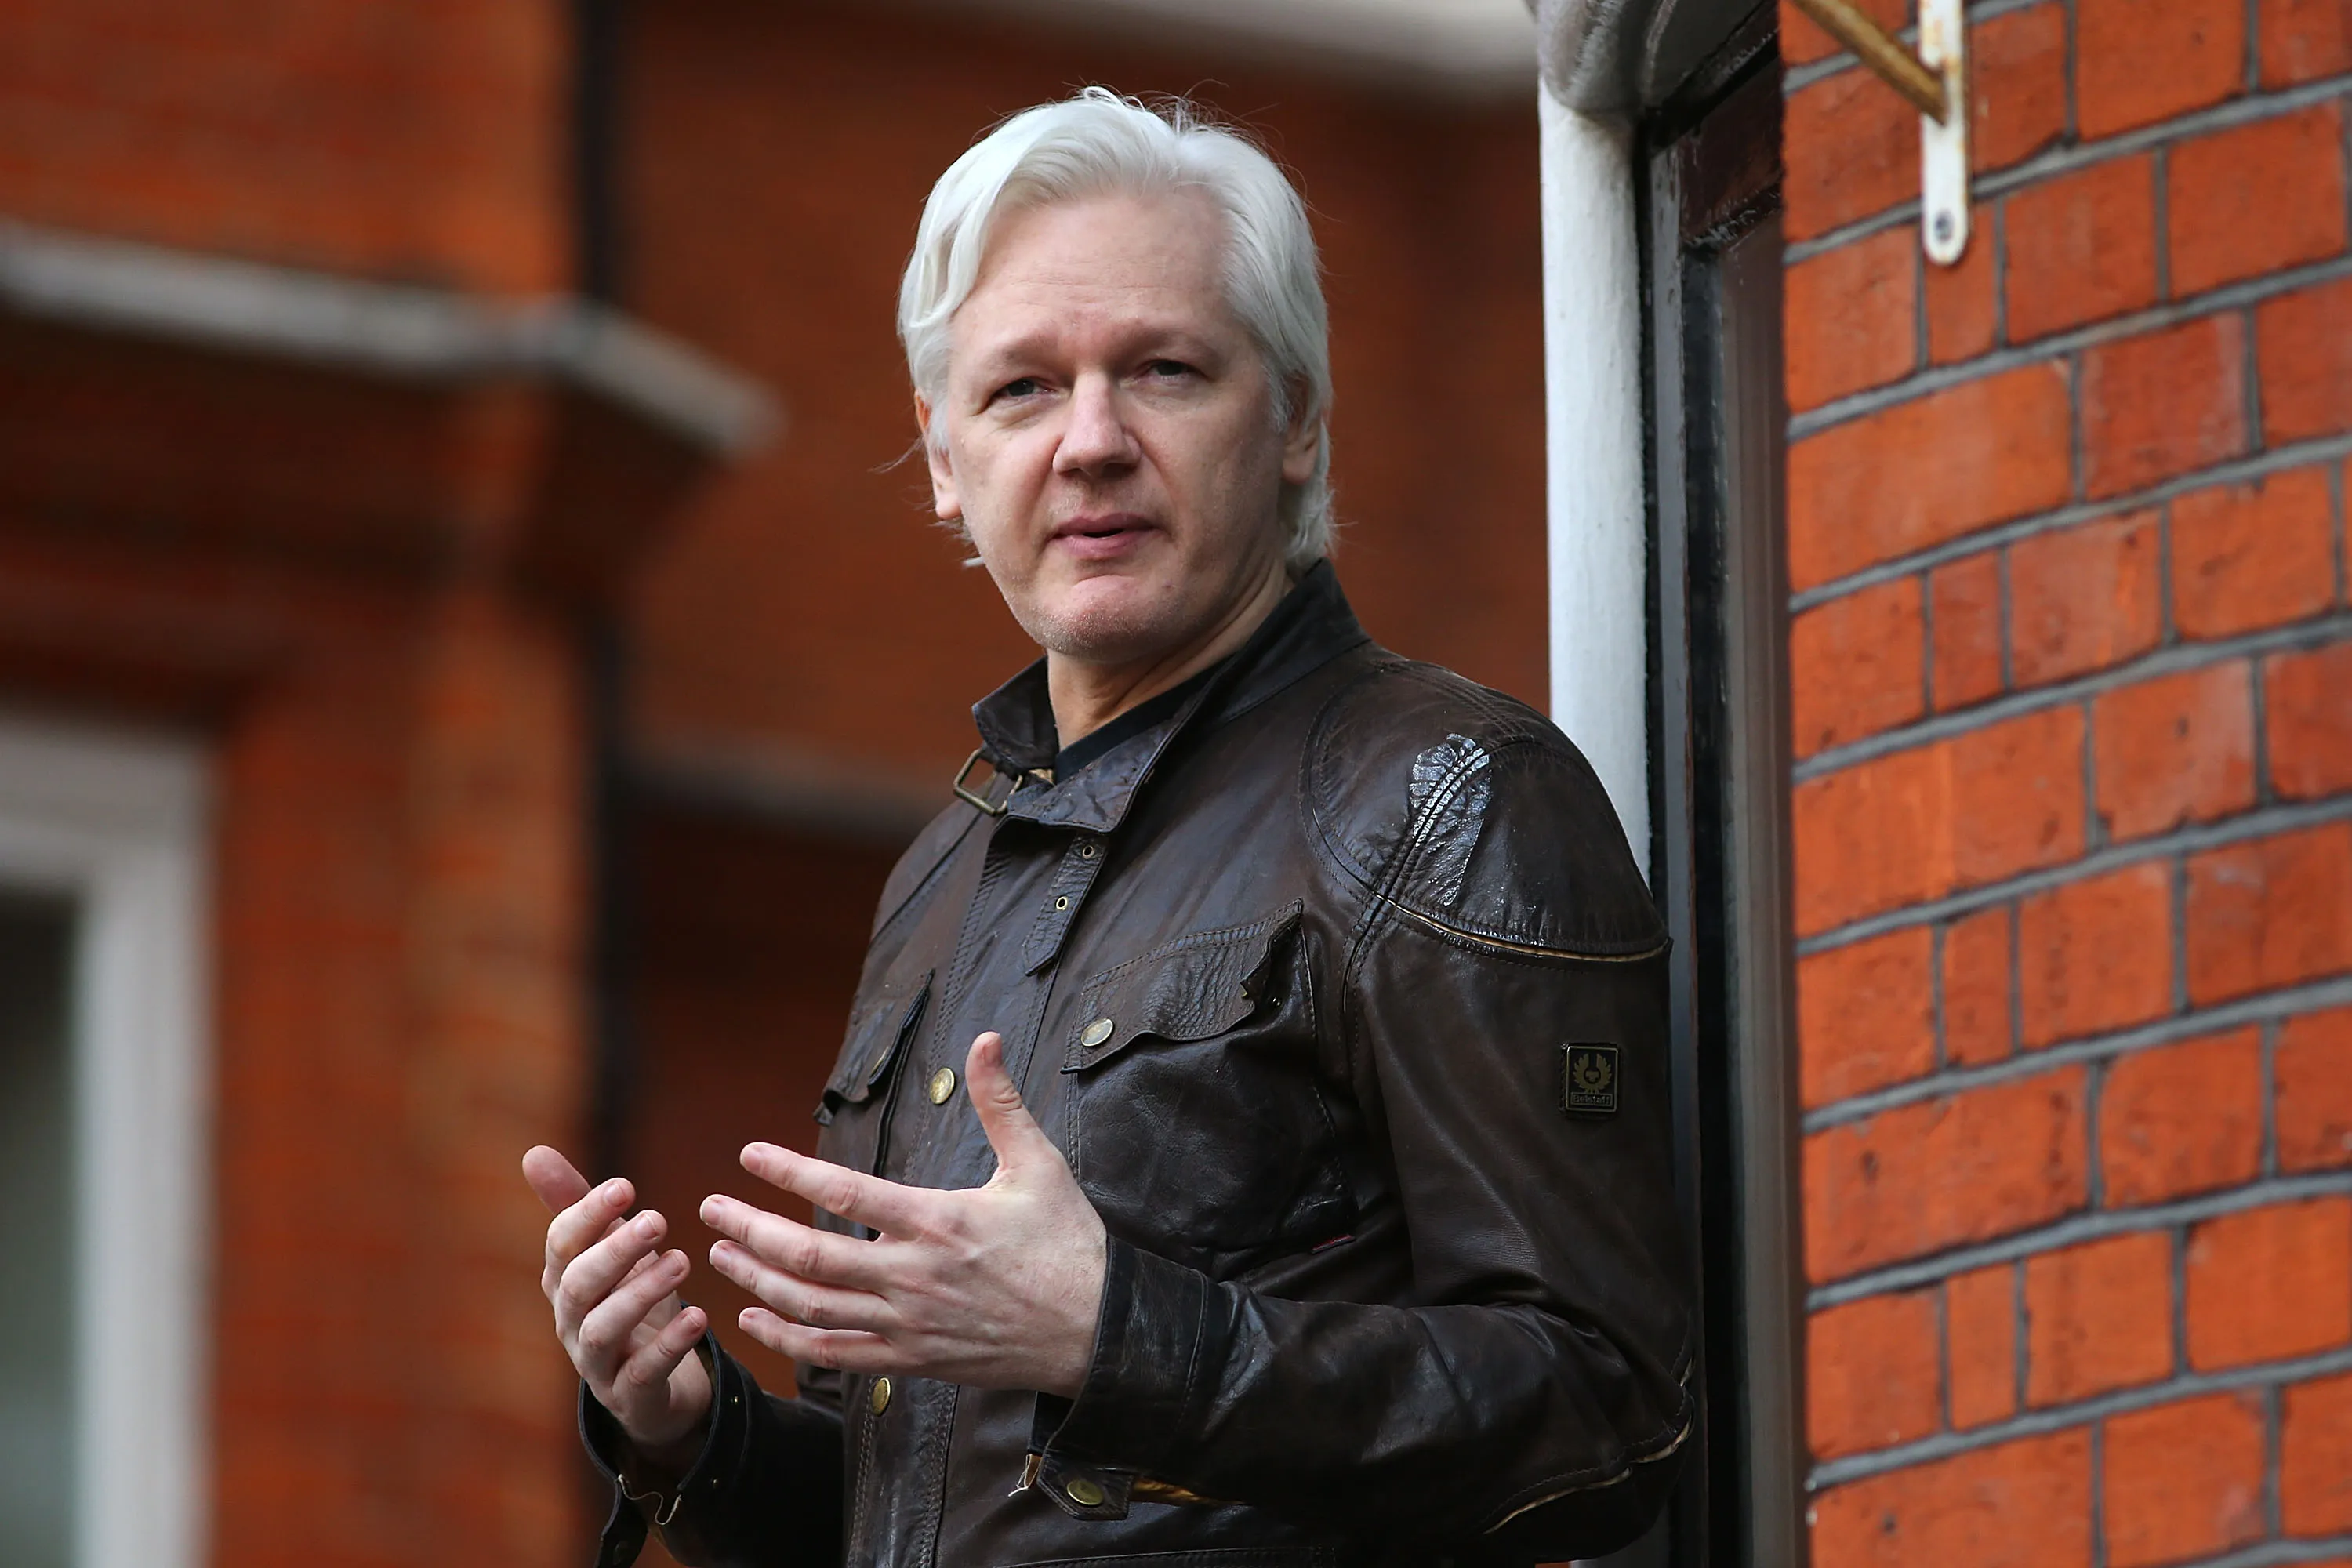 Julian Assange Says Wikileaks Has Made a 50,000% Return on Bitcoin. Here's What That Means